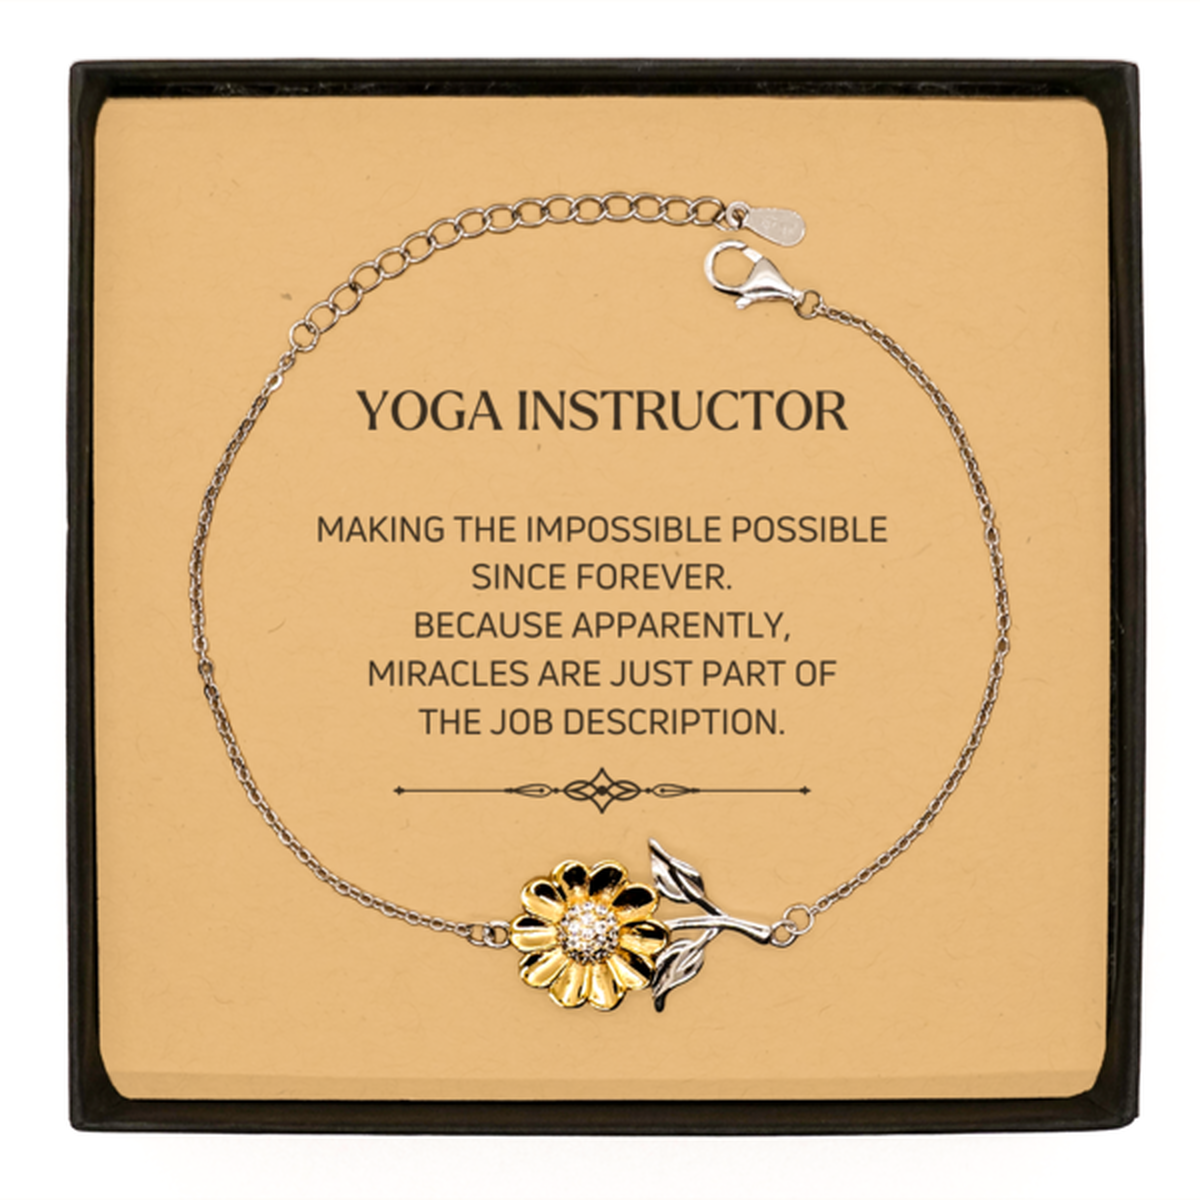 Funny Yoga Instructor Gifts, Miracles are just part of the job description, Inspirational Birthday Sunflower Bracelet For Yoga Instructor, Men, Women, Coworkers, Friends, Boss